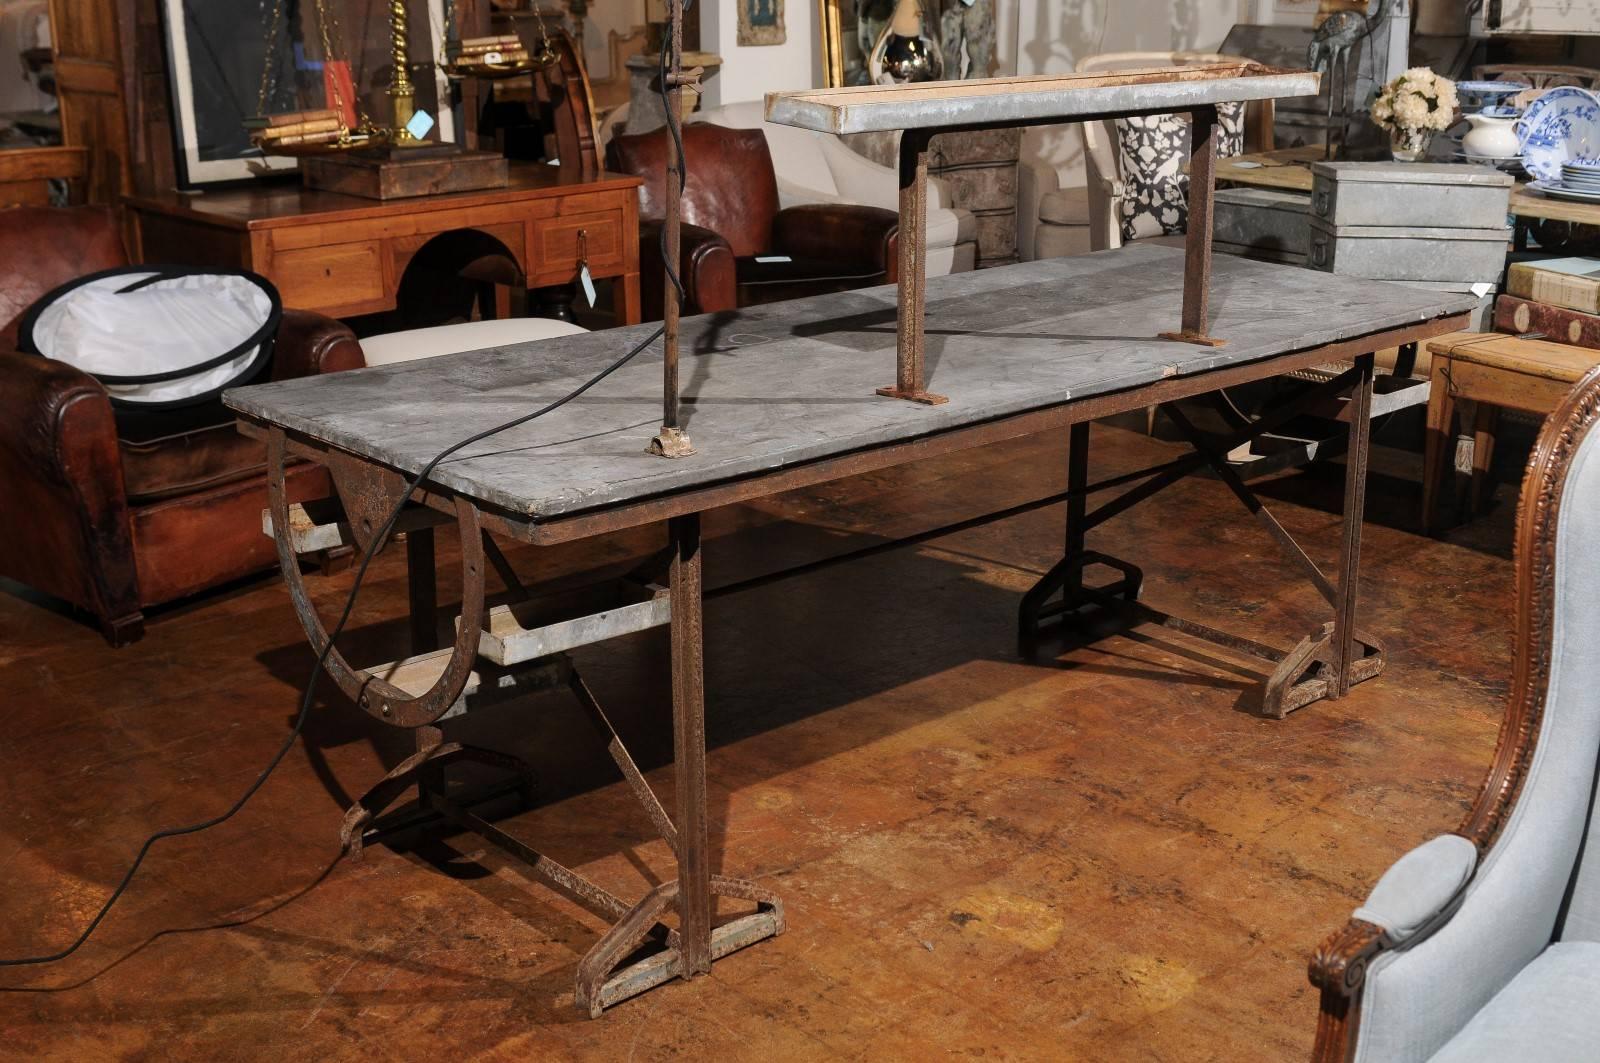 French 1890s Industrial Iron and Zinc Work Table with Shelves and Task Light 4